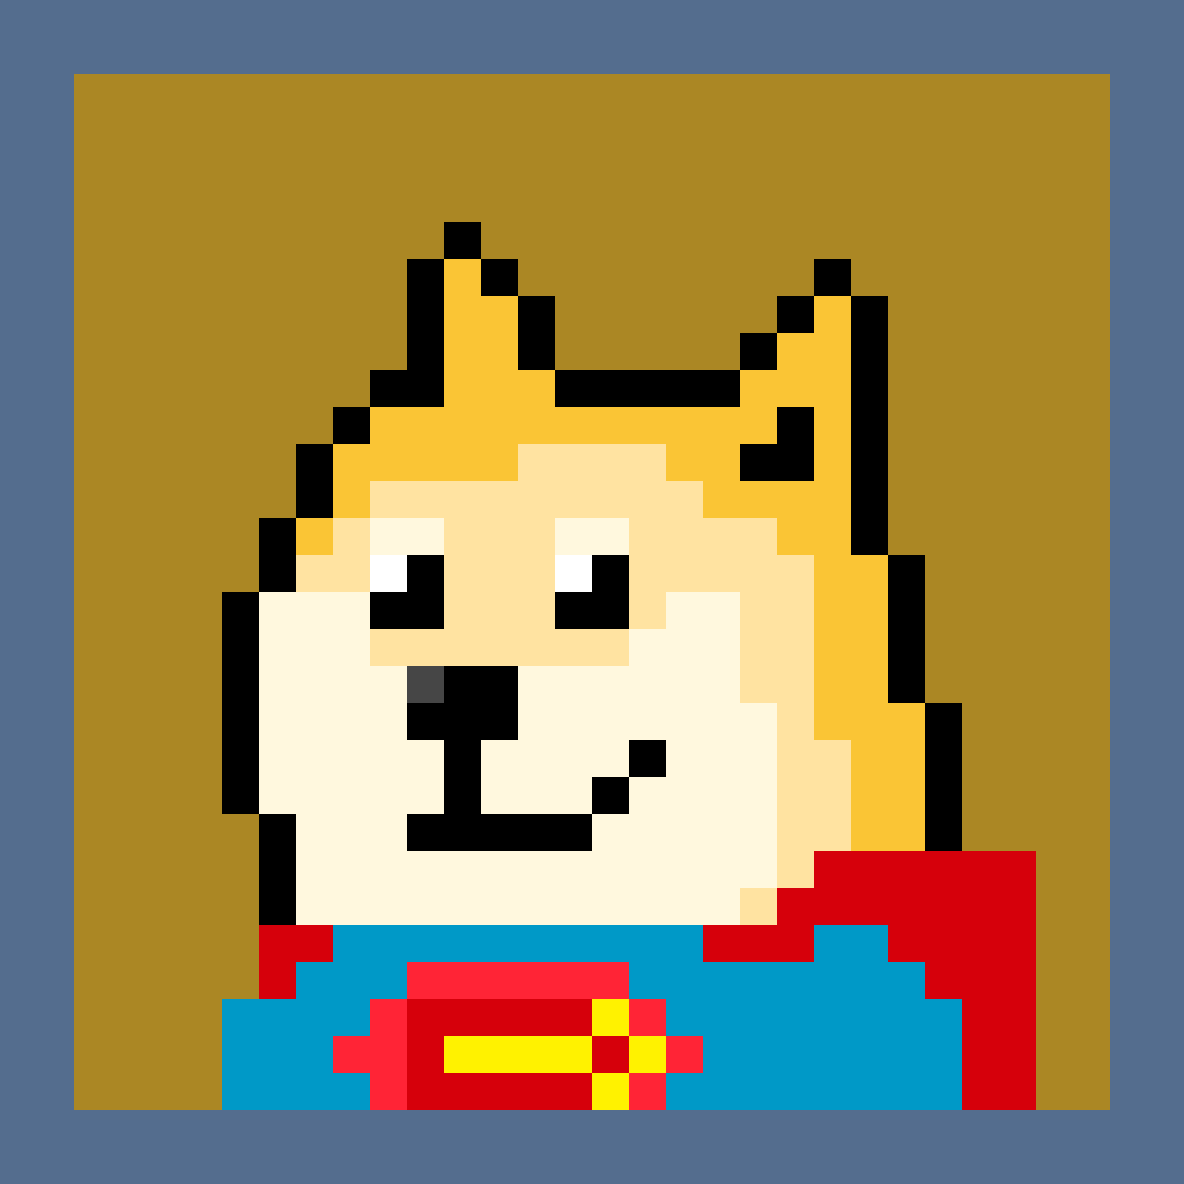 GM Fam!✊🧡

Having the right motivations is the difference between activating our superpowers or remaining ordinary mortals.

💪Don't forget there is a superhero in all of us! 🦸
#SuperDoge #Ordinals